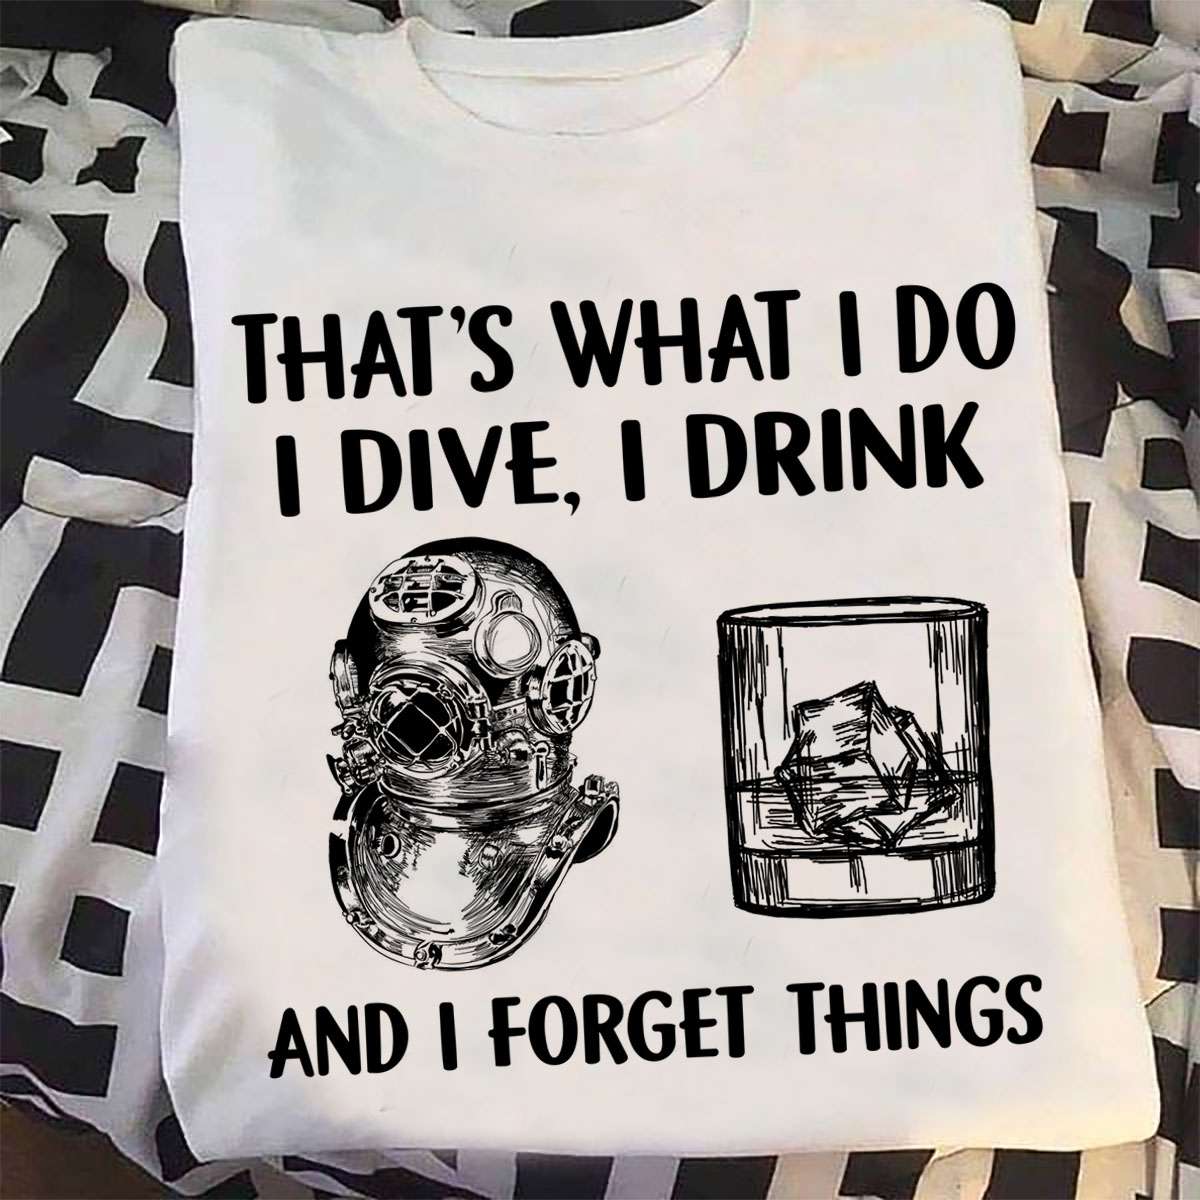 That's what I do I dive, I drink and I forget things - Diving and drinking